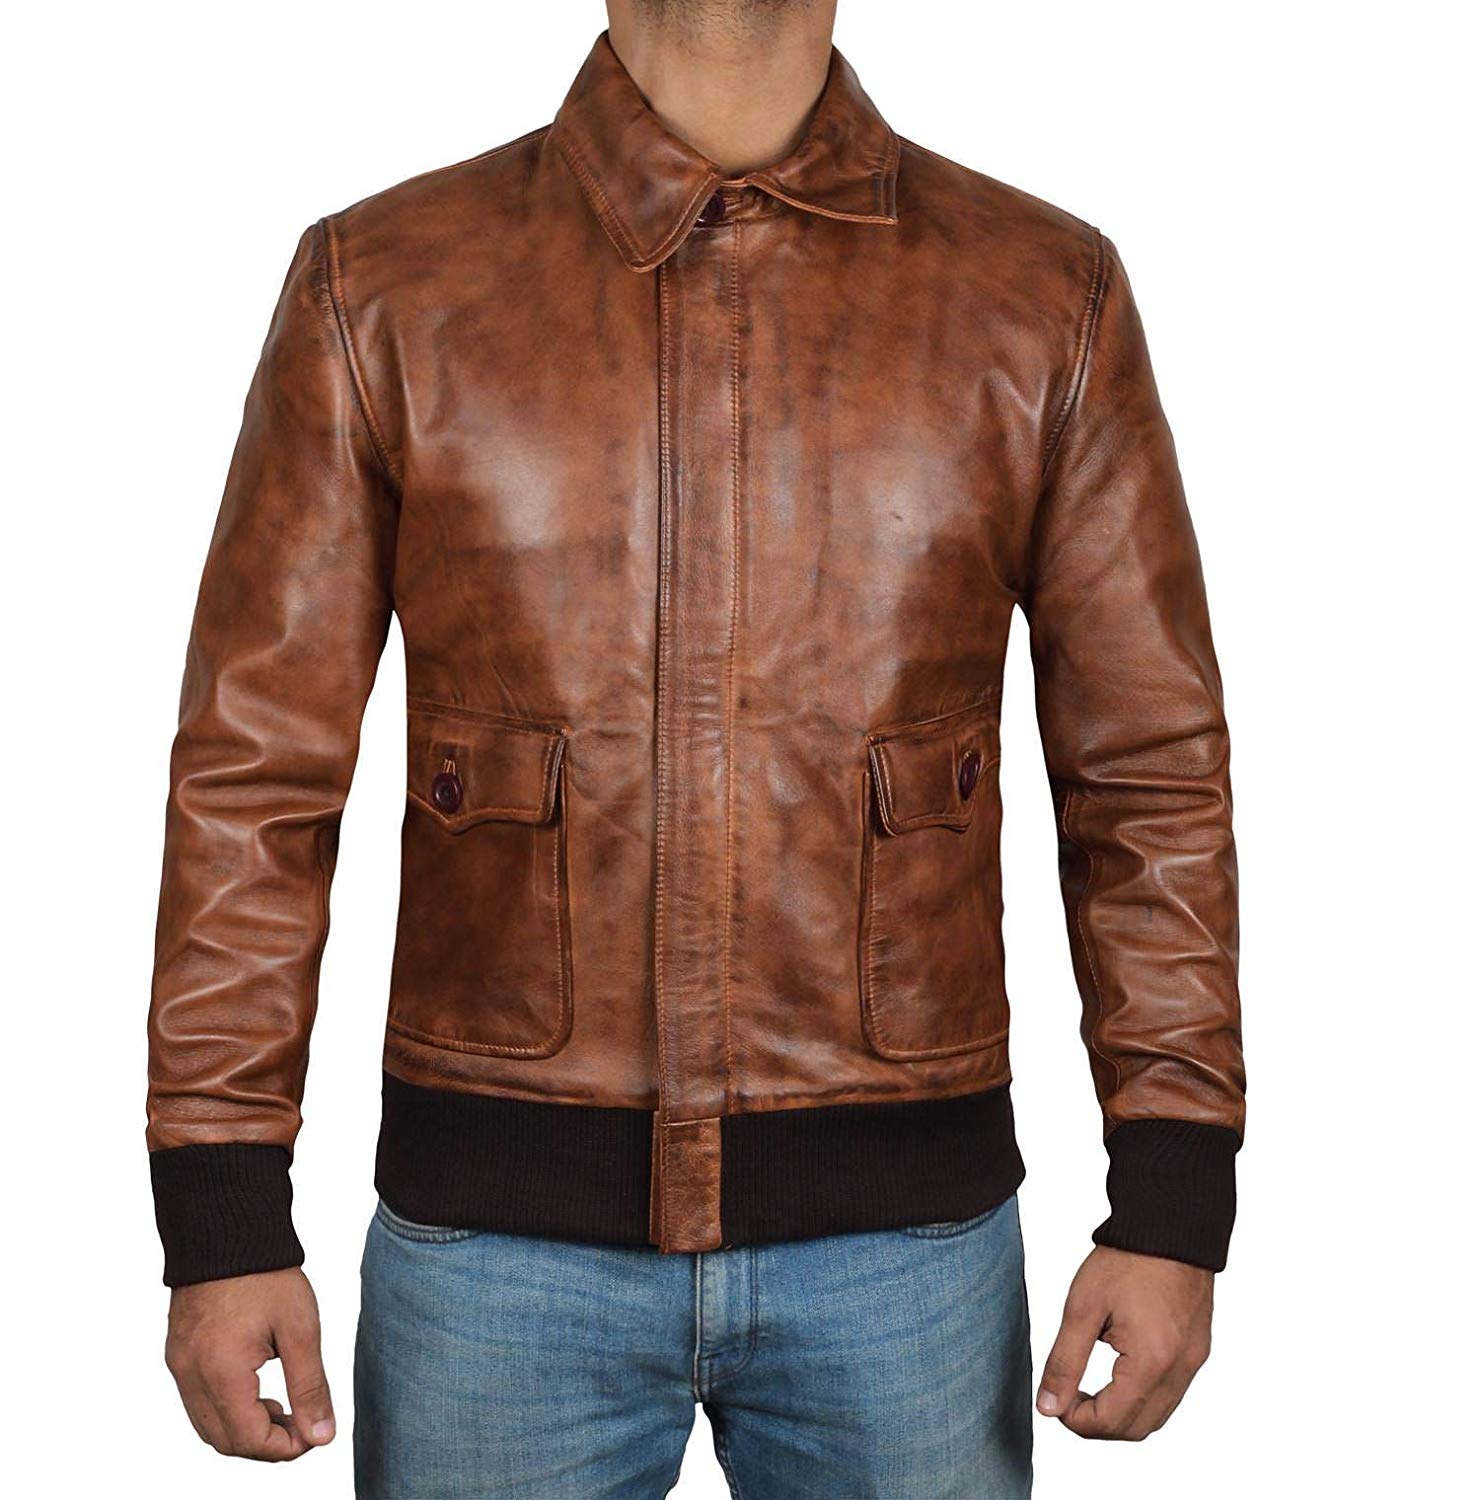 Kingdom Leather New Men Quilted Leather Jacket Soft Lambskin Biker Bomber X634 